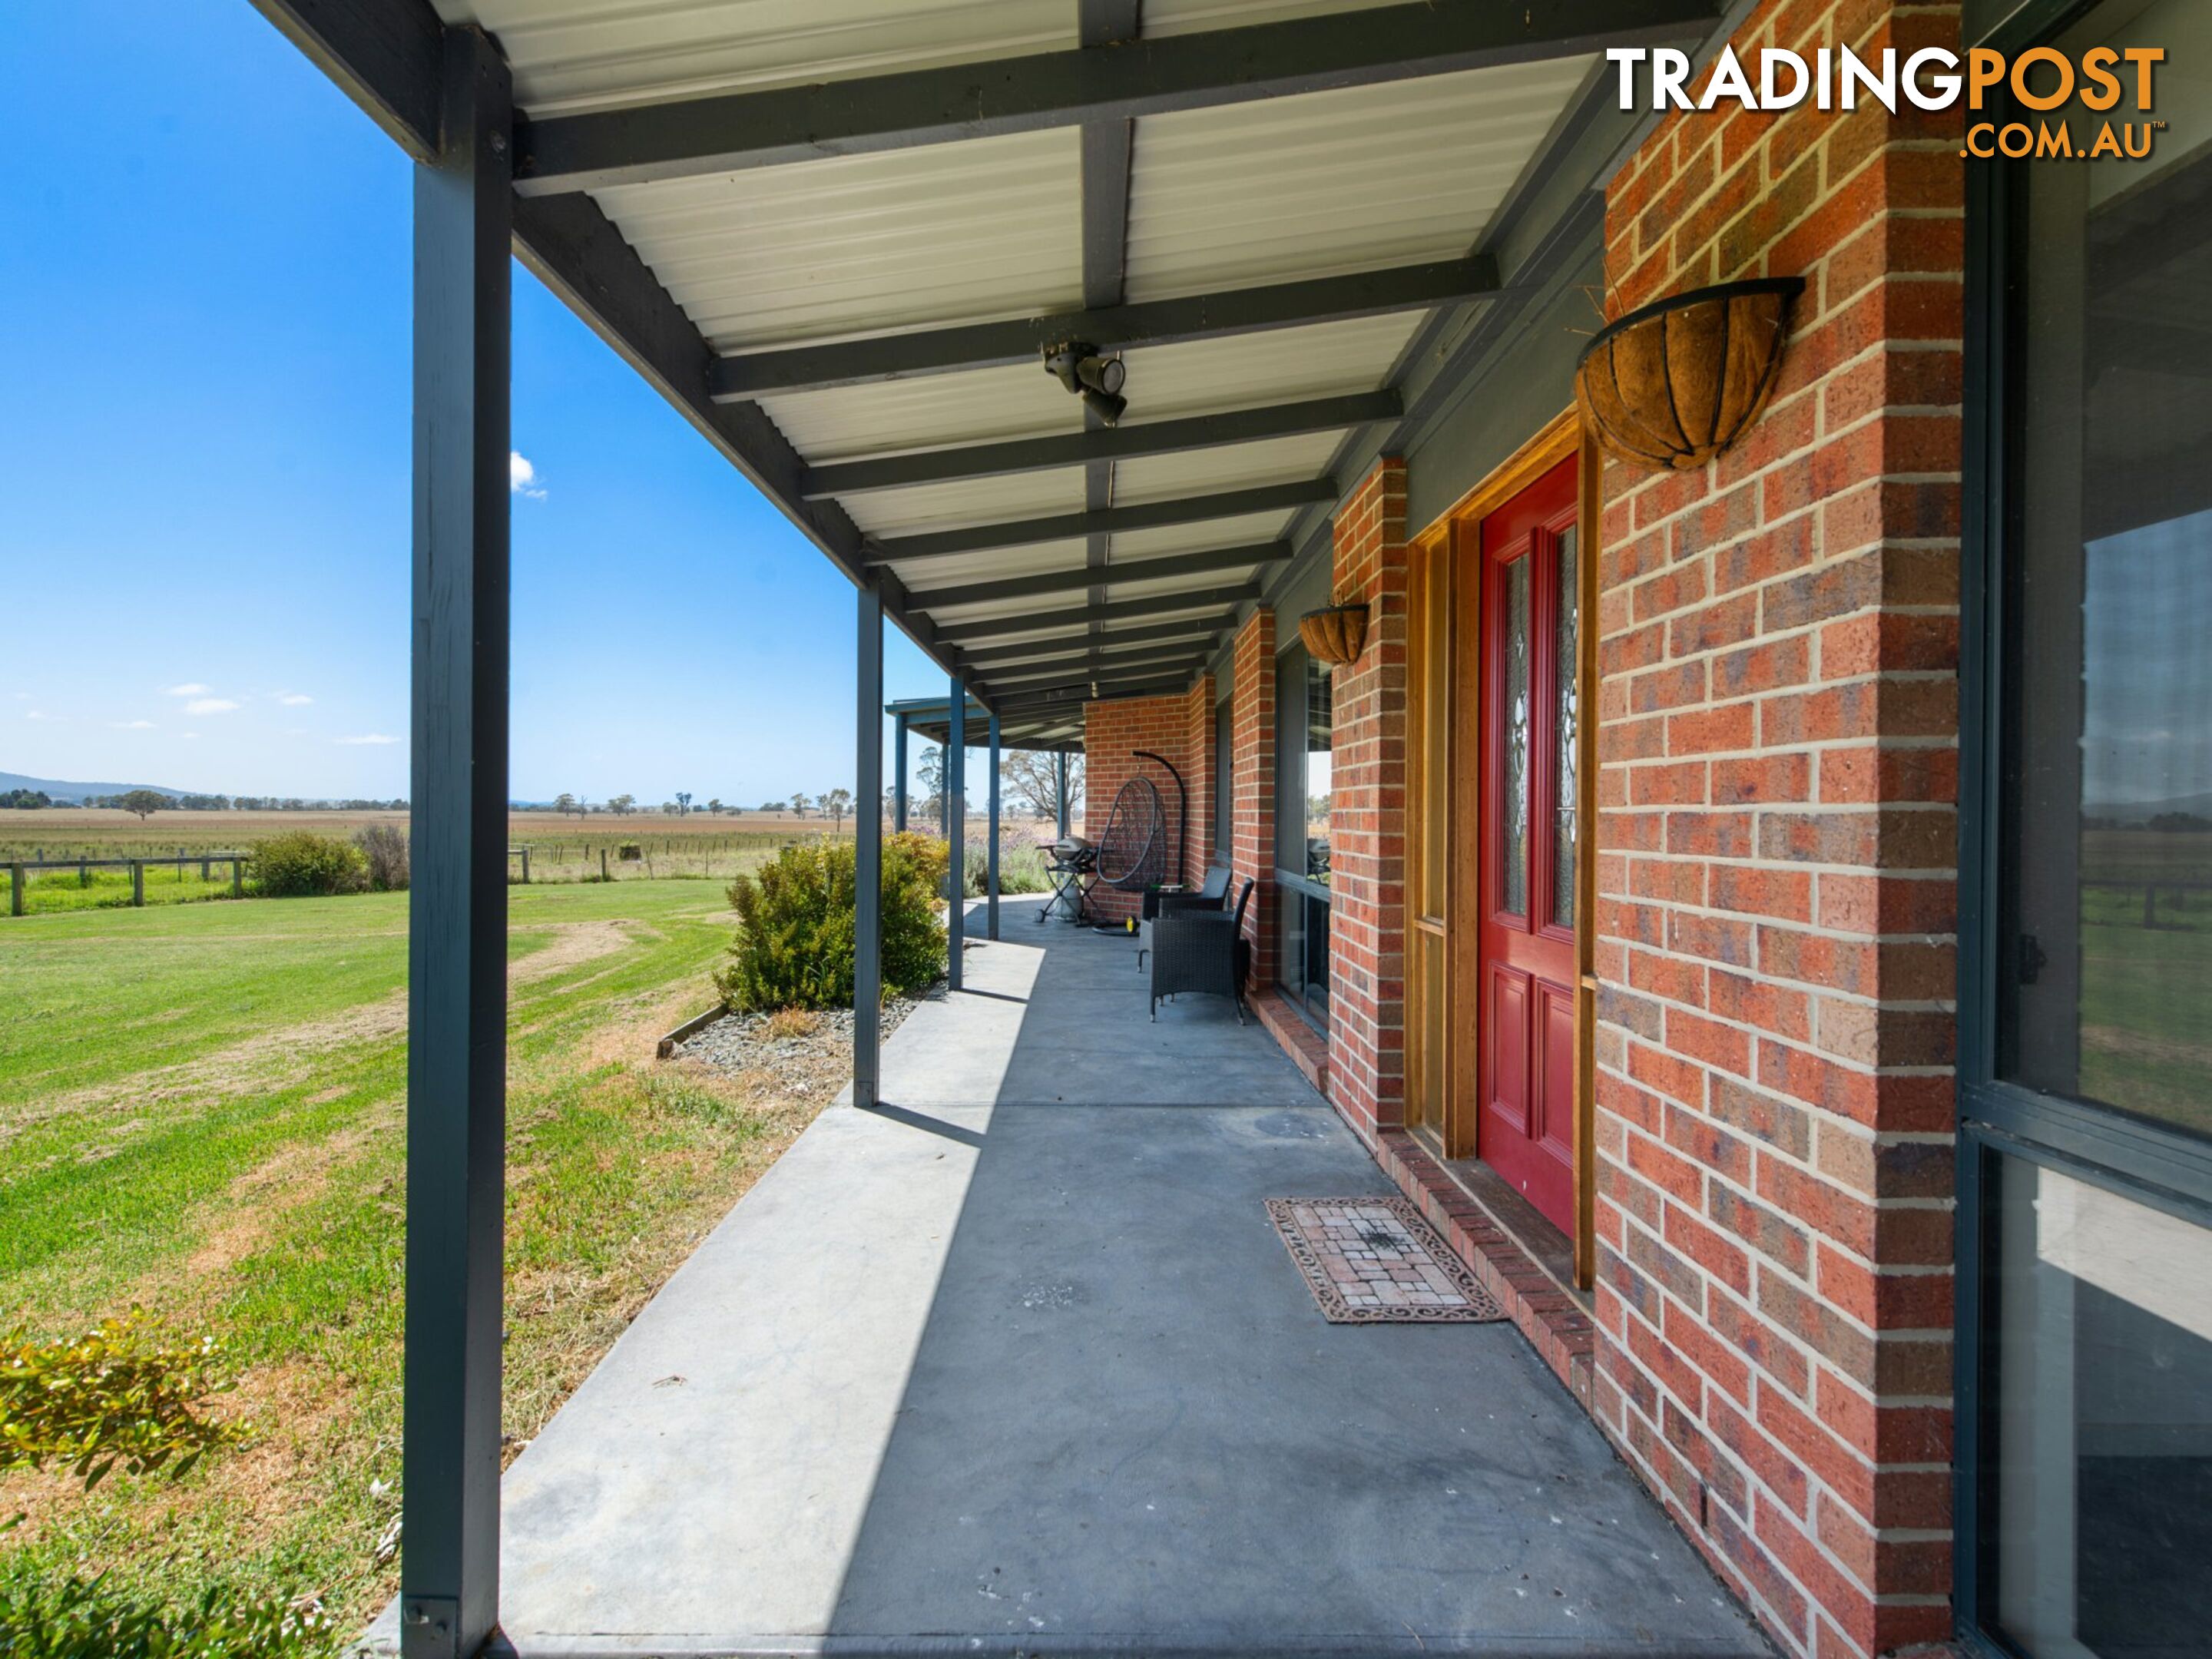 646 Lindenow-Glenaladale Road LINDENOW SOUTH VIC 3875